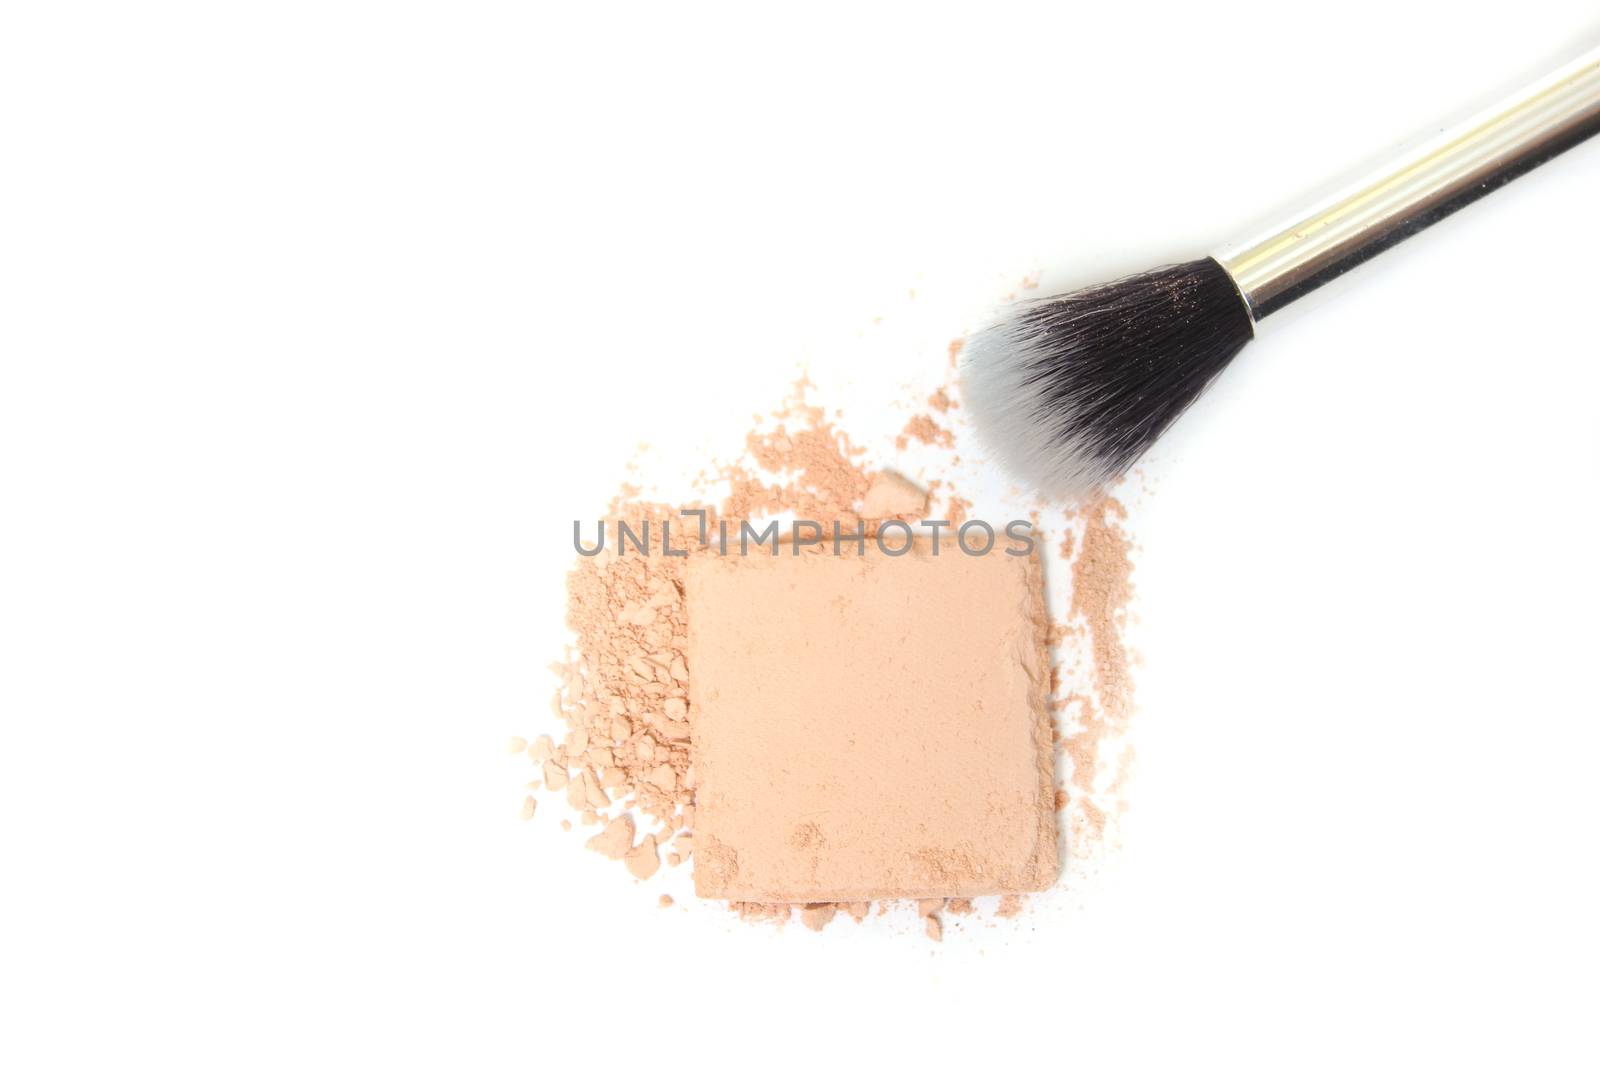 Broken Eyeshadow With Brush on White by Marti157900